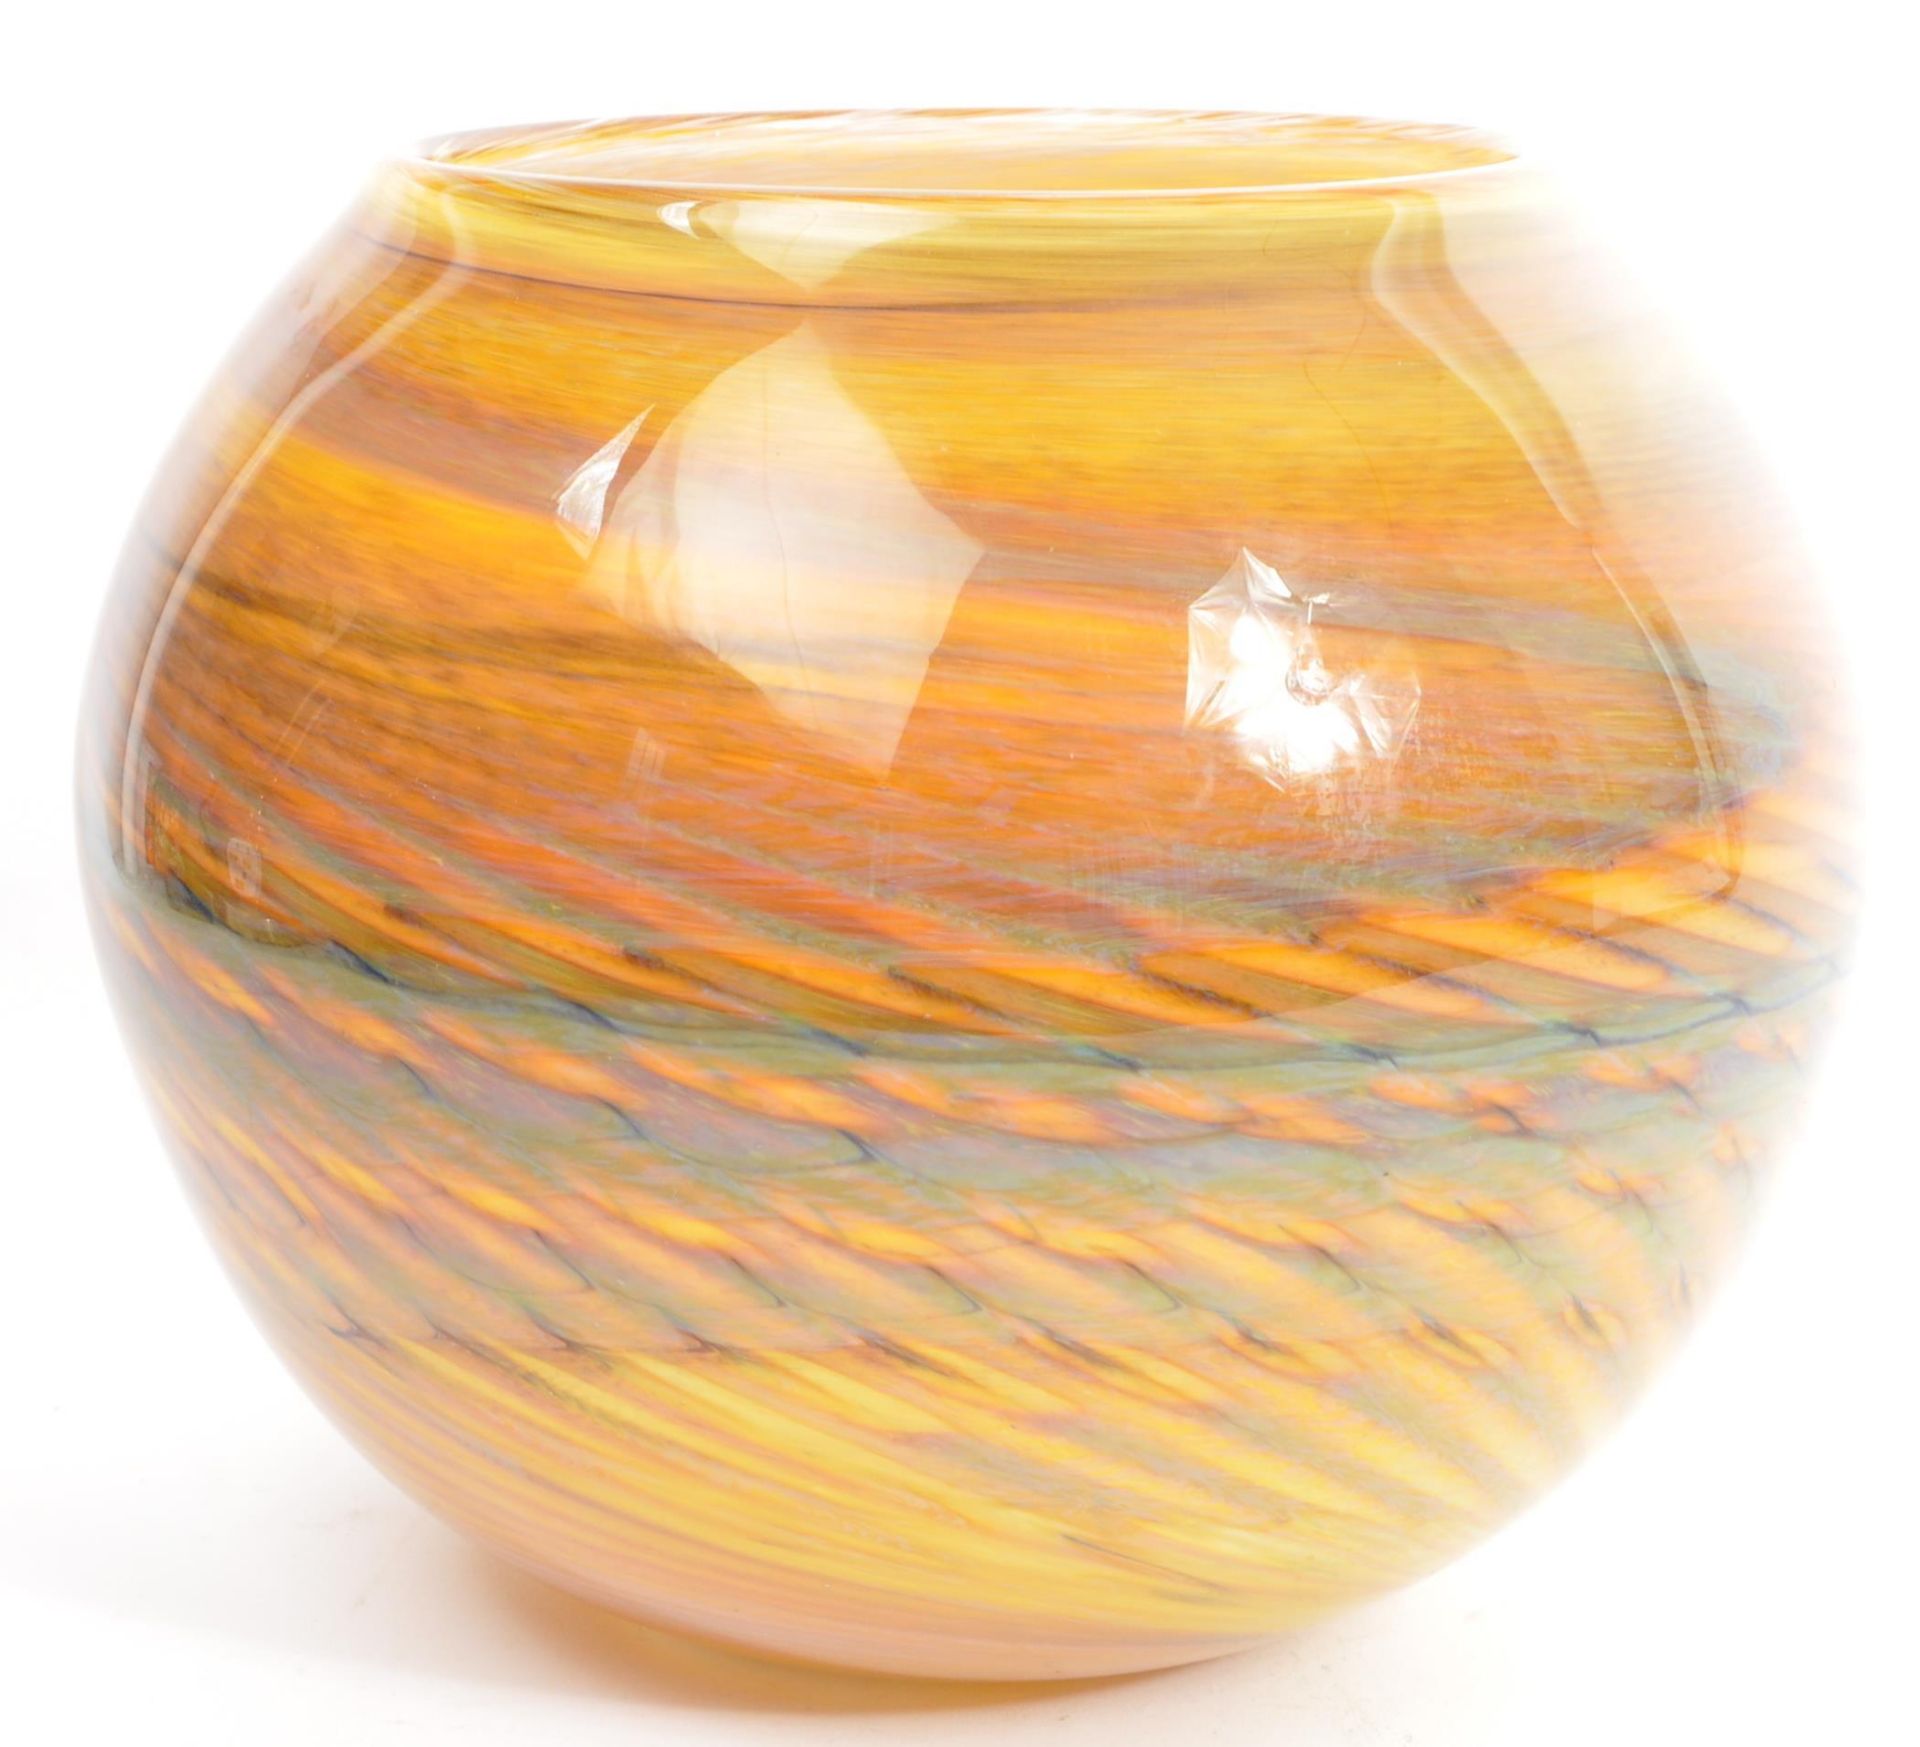 A CONTEMPORARY SIDDY LANGLEY STUDIO ART GLASS VASE SCULPTURE - Image 2 of 5